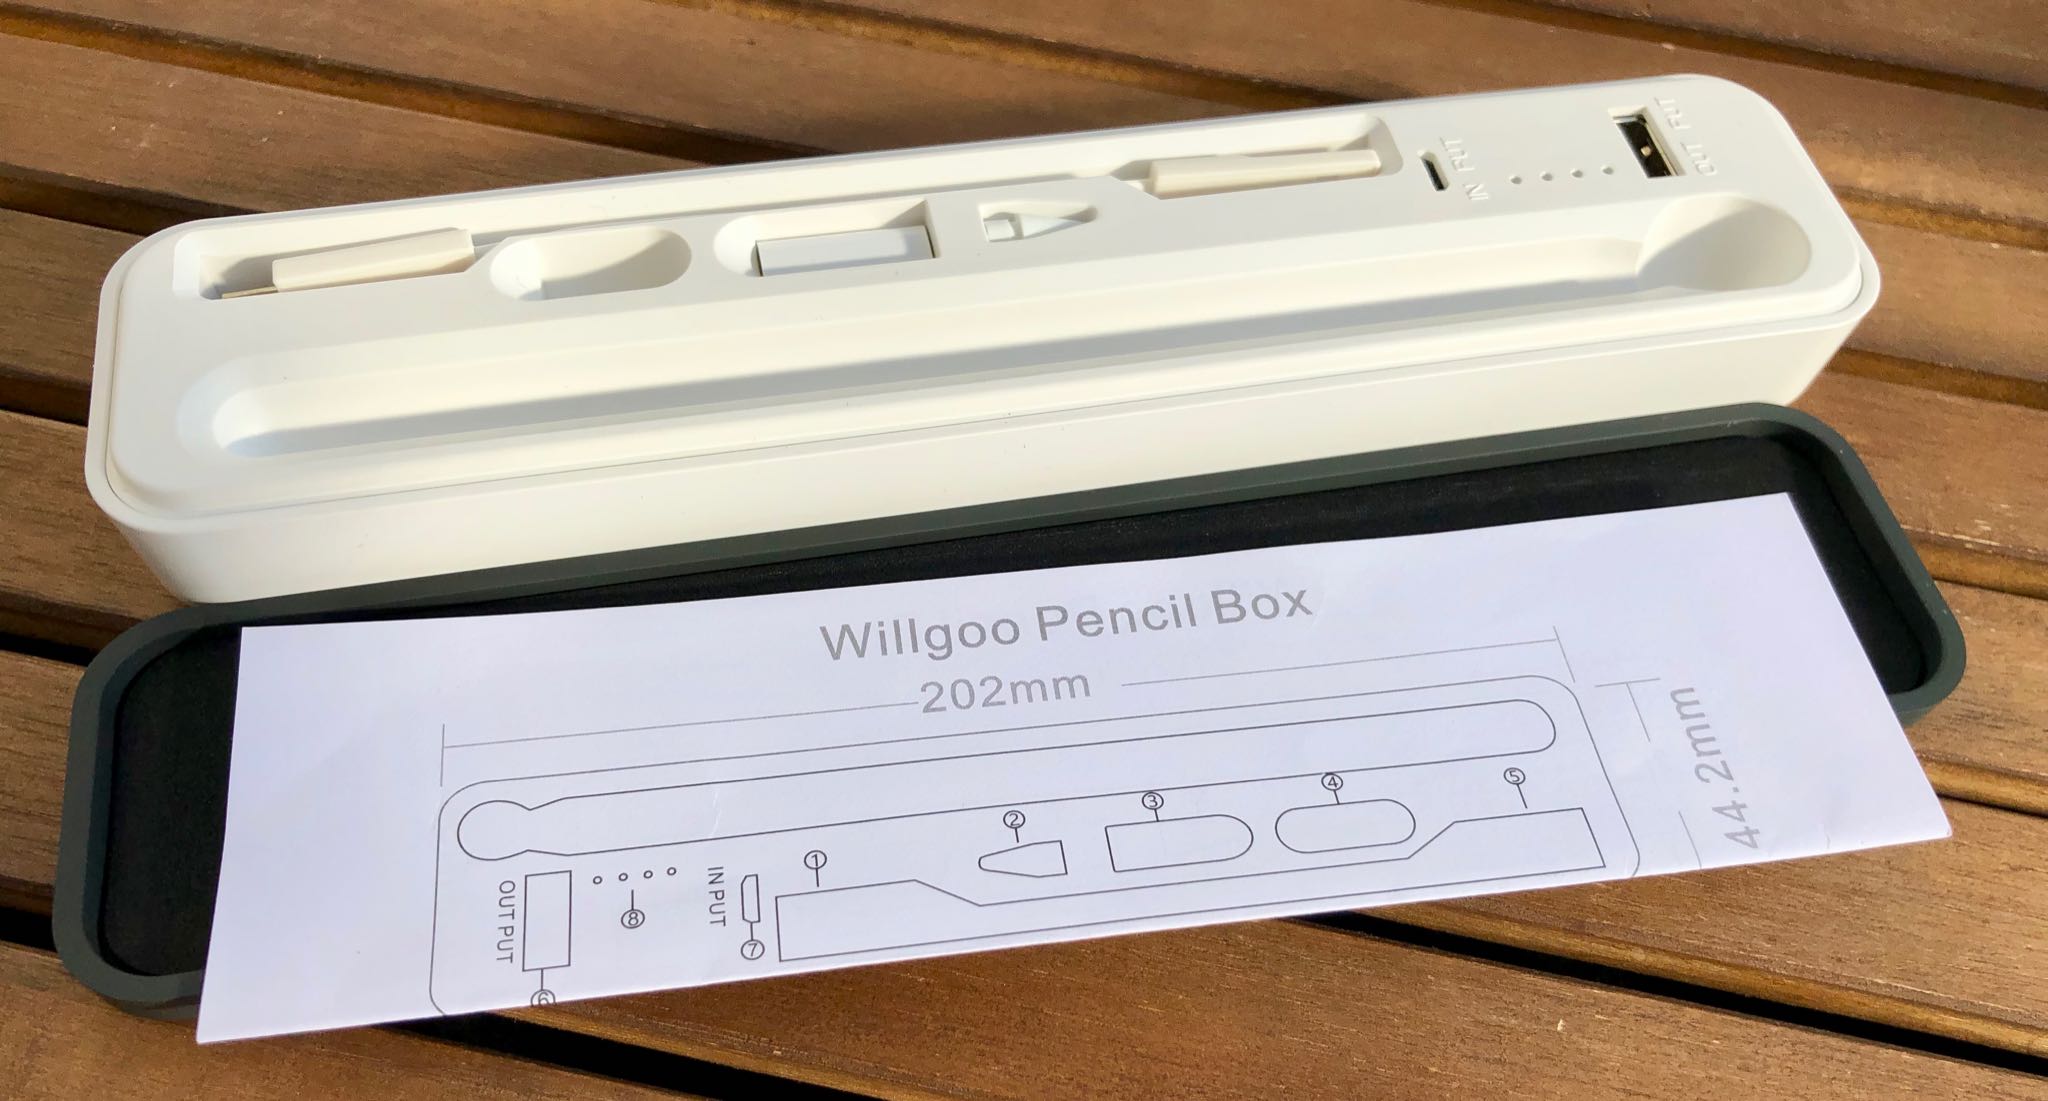 Apple Pencil holder is a stylish carrying case for your stylus and its accessories